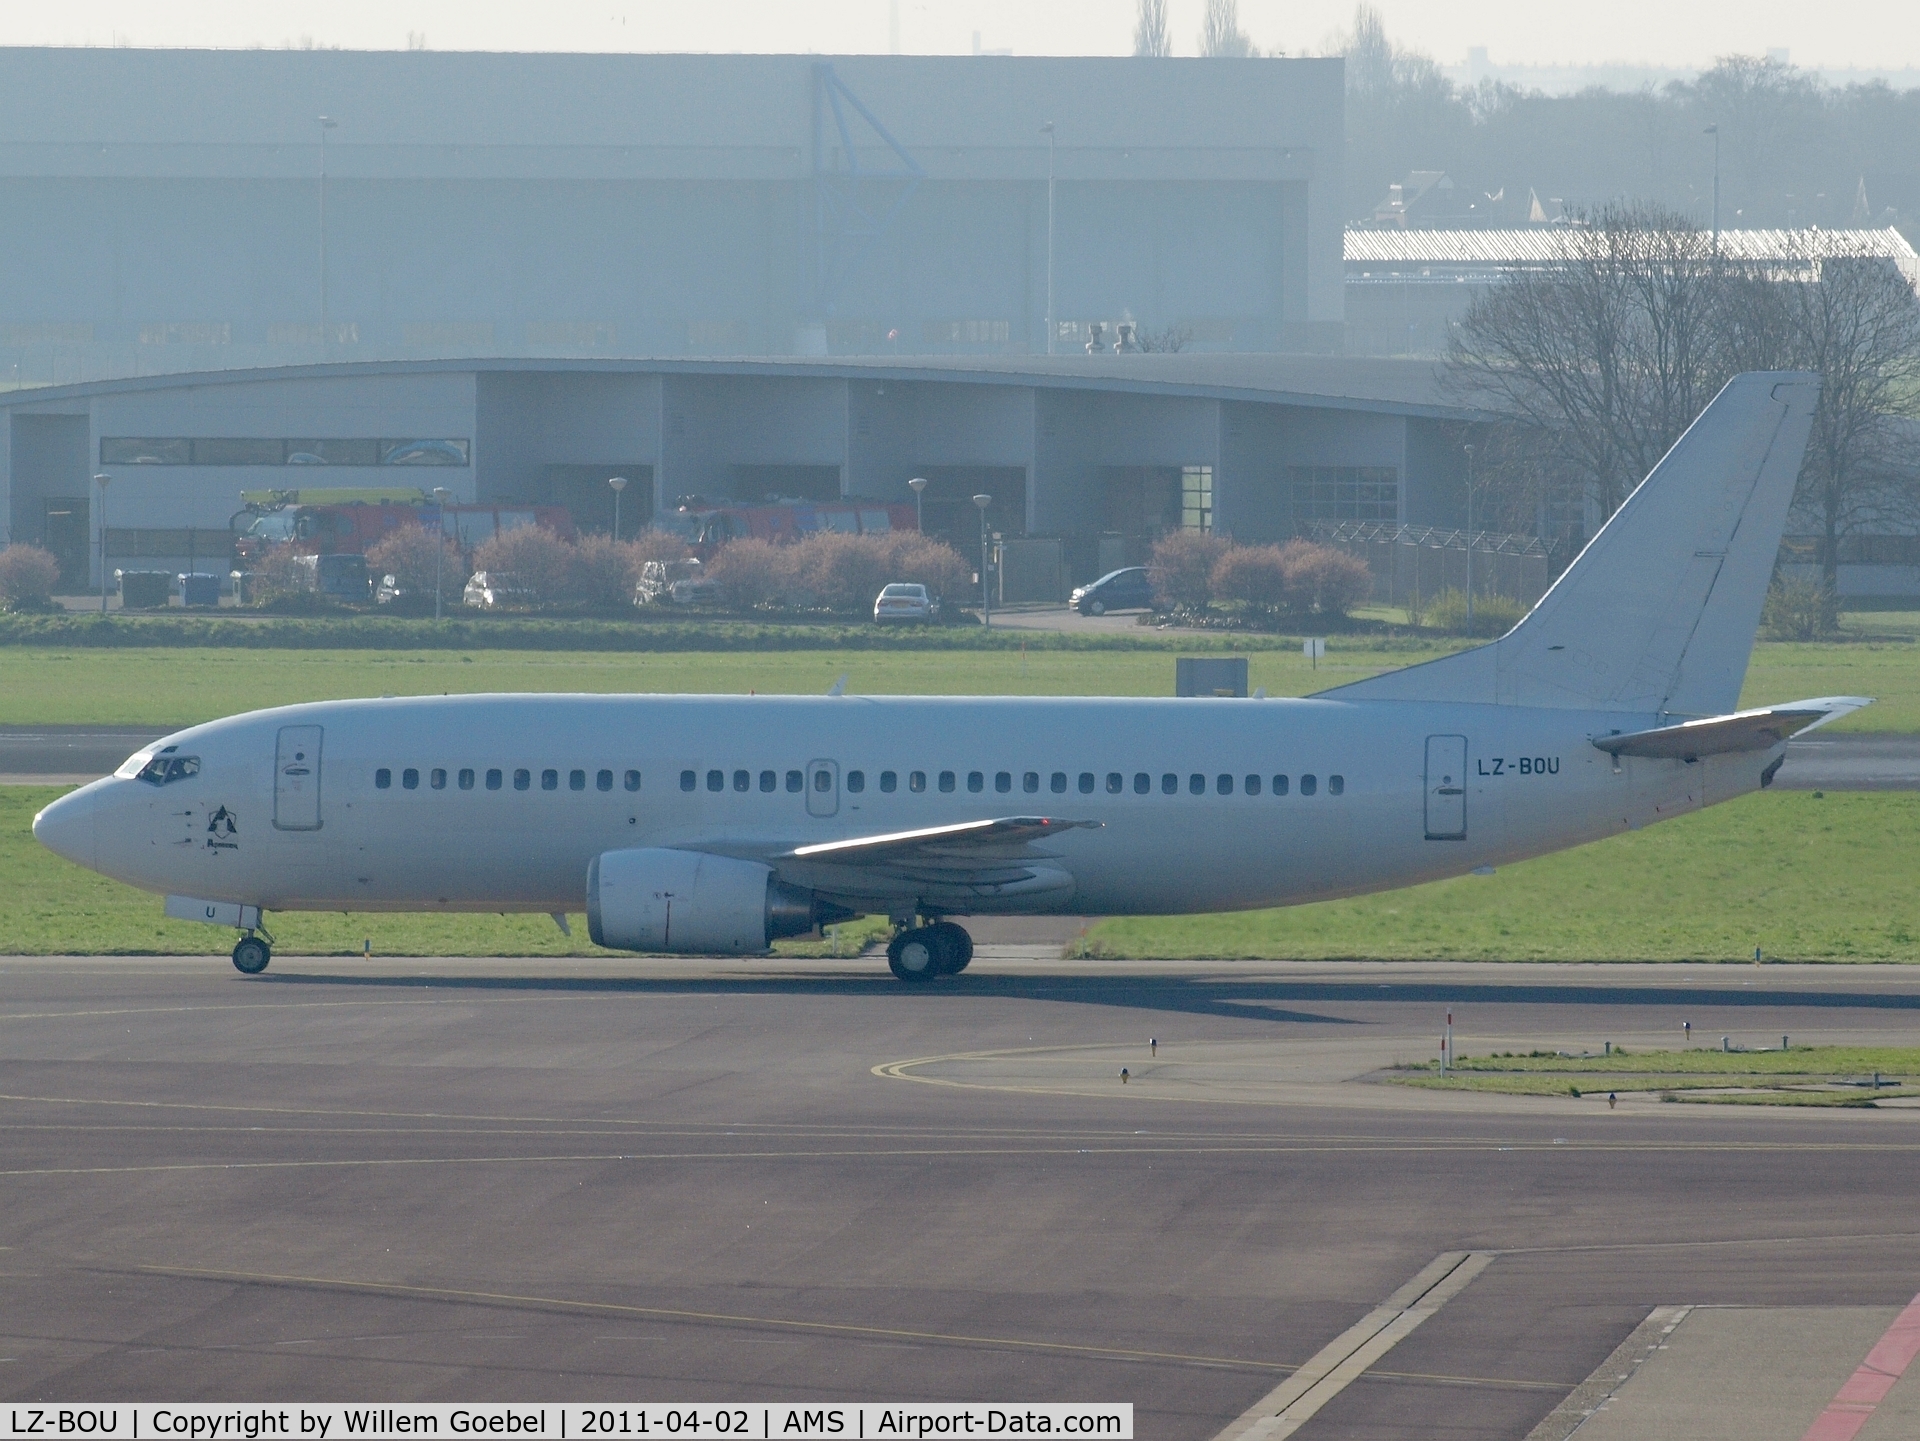 LZ-BOU, 1987 Boeing 737-3L9 C/N 23717/1365, Taxi to runway L18 of Schiphol Airport